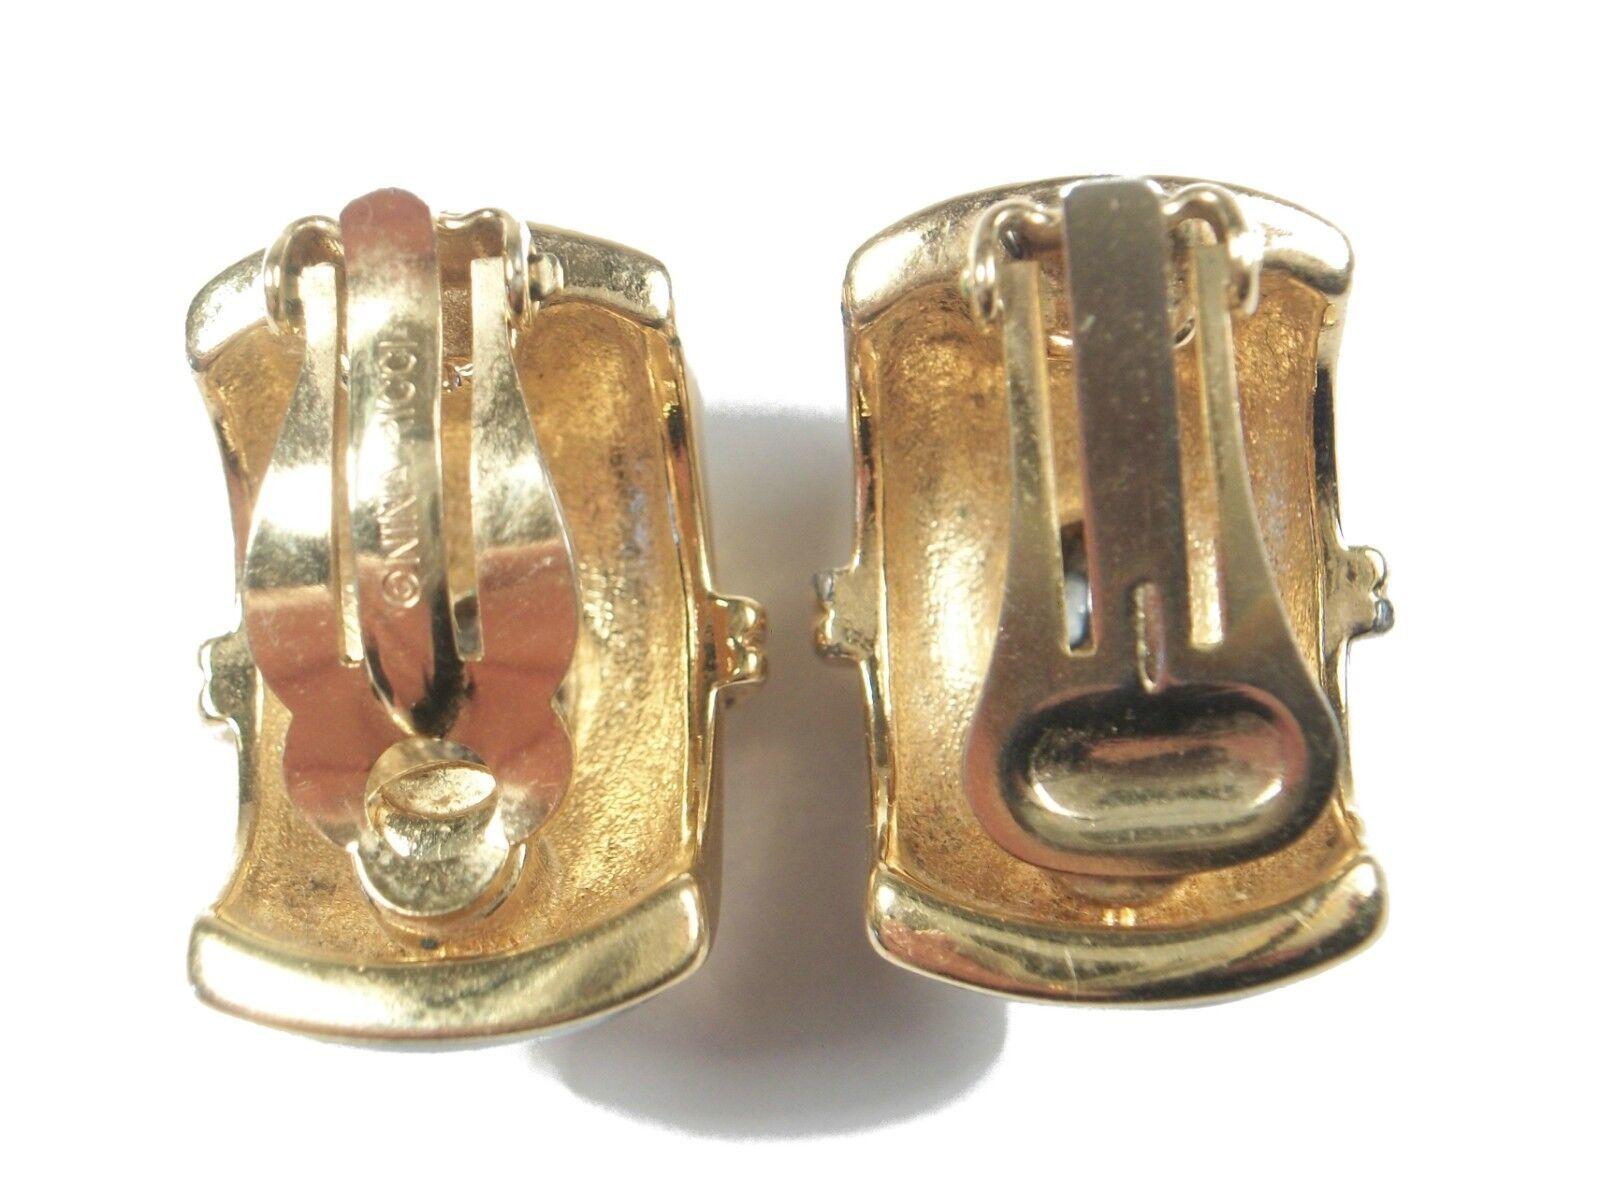 NINA RICCI - Vintage Enamel & Rhinestone Earrings - Clip On - Signed - C. 1980's In Good Condition For Sale In Chatham, CA